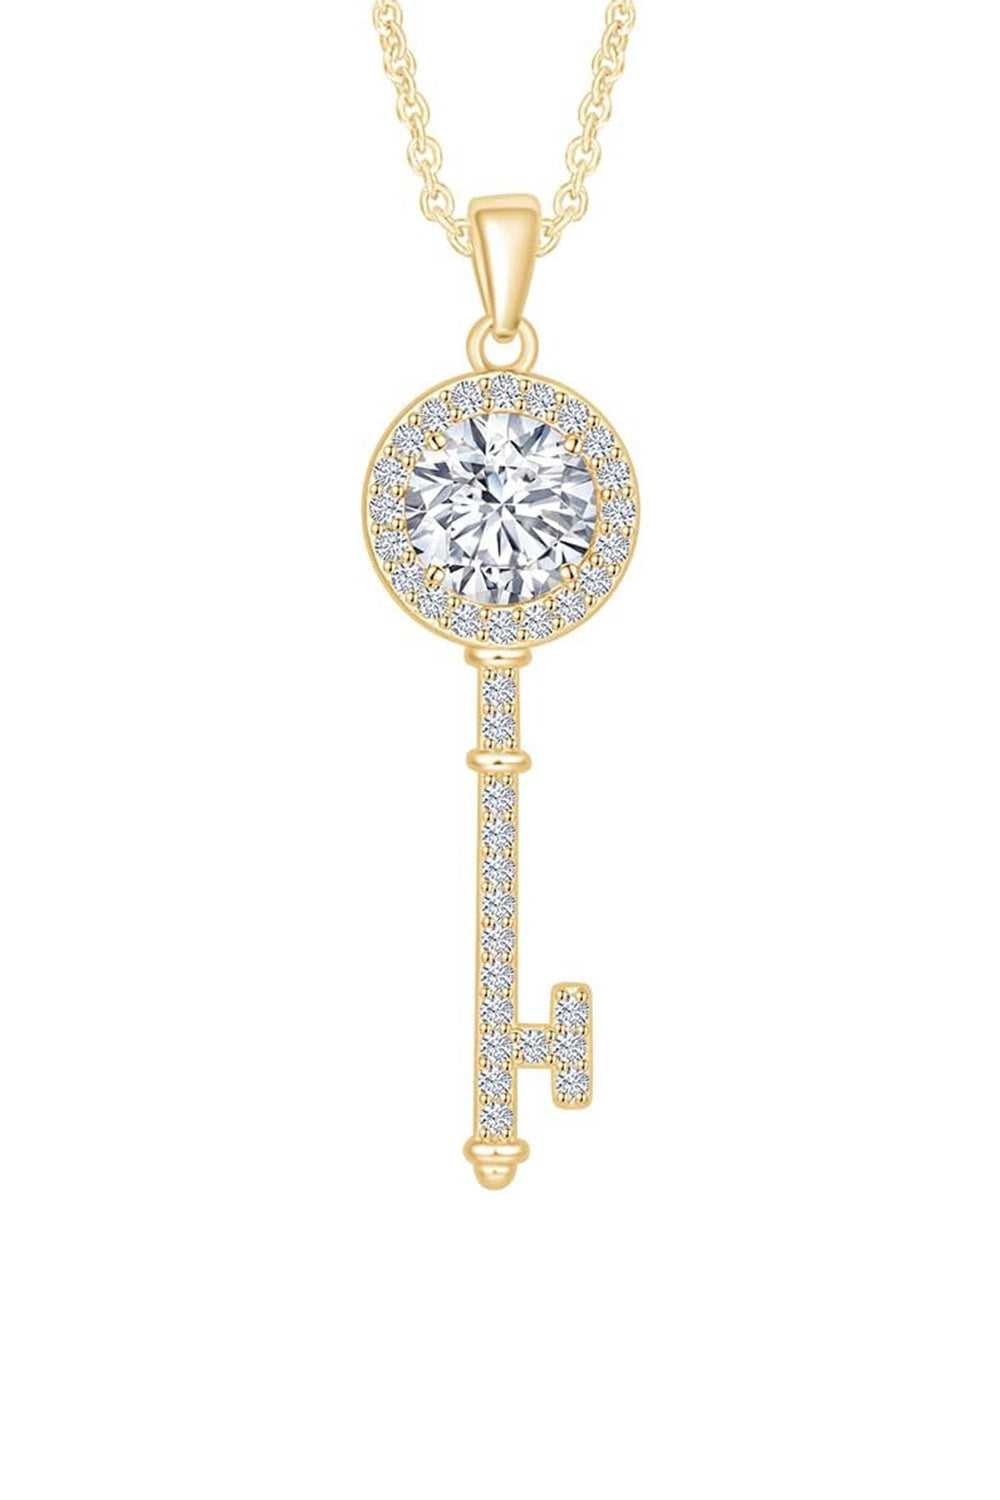 1 Carat (Ctw) Moissanite Key Pendant Necklace in 18K Gold Plated Sterling Silver.